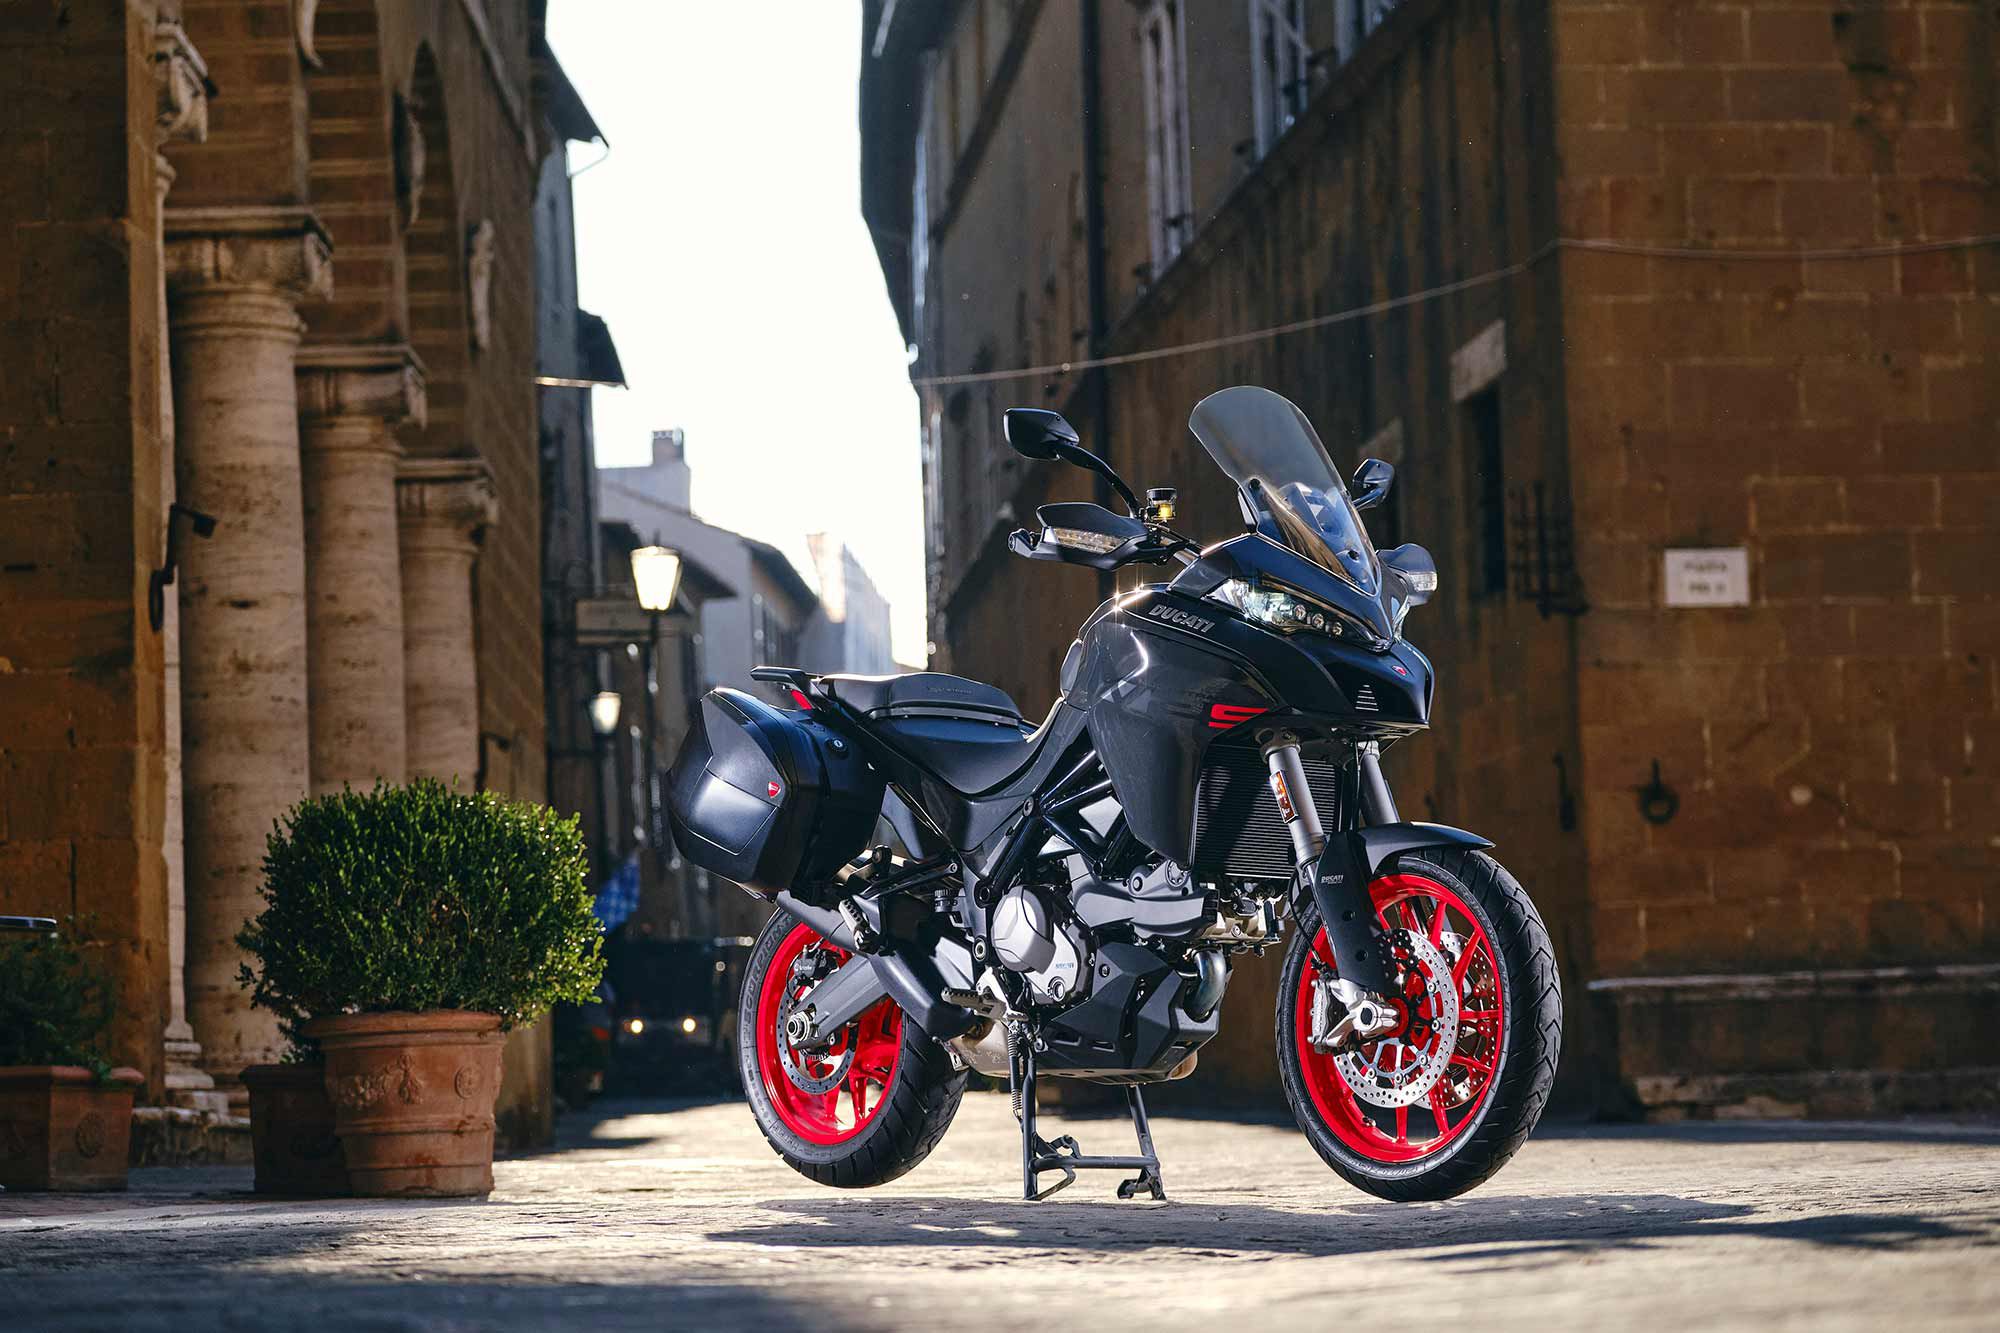 Designers refined the lines of the Multistrada from tip to tail.